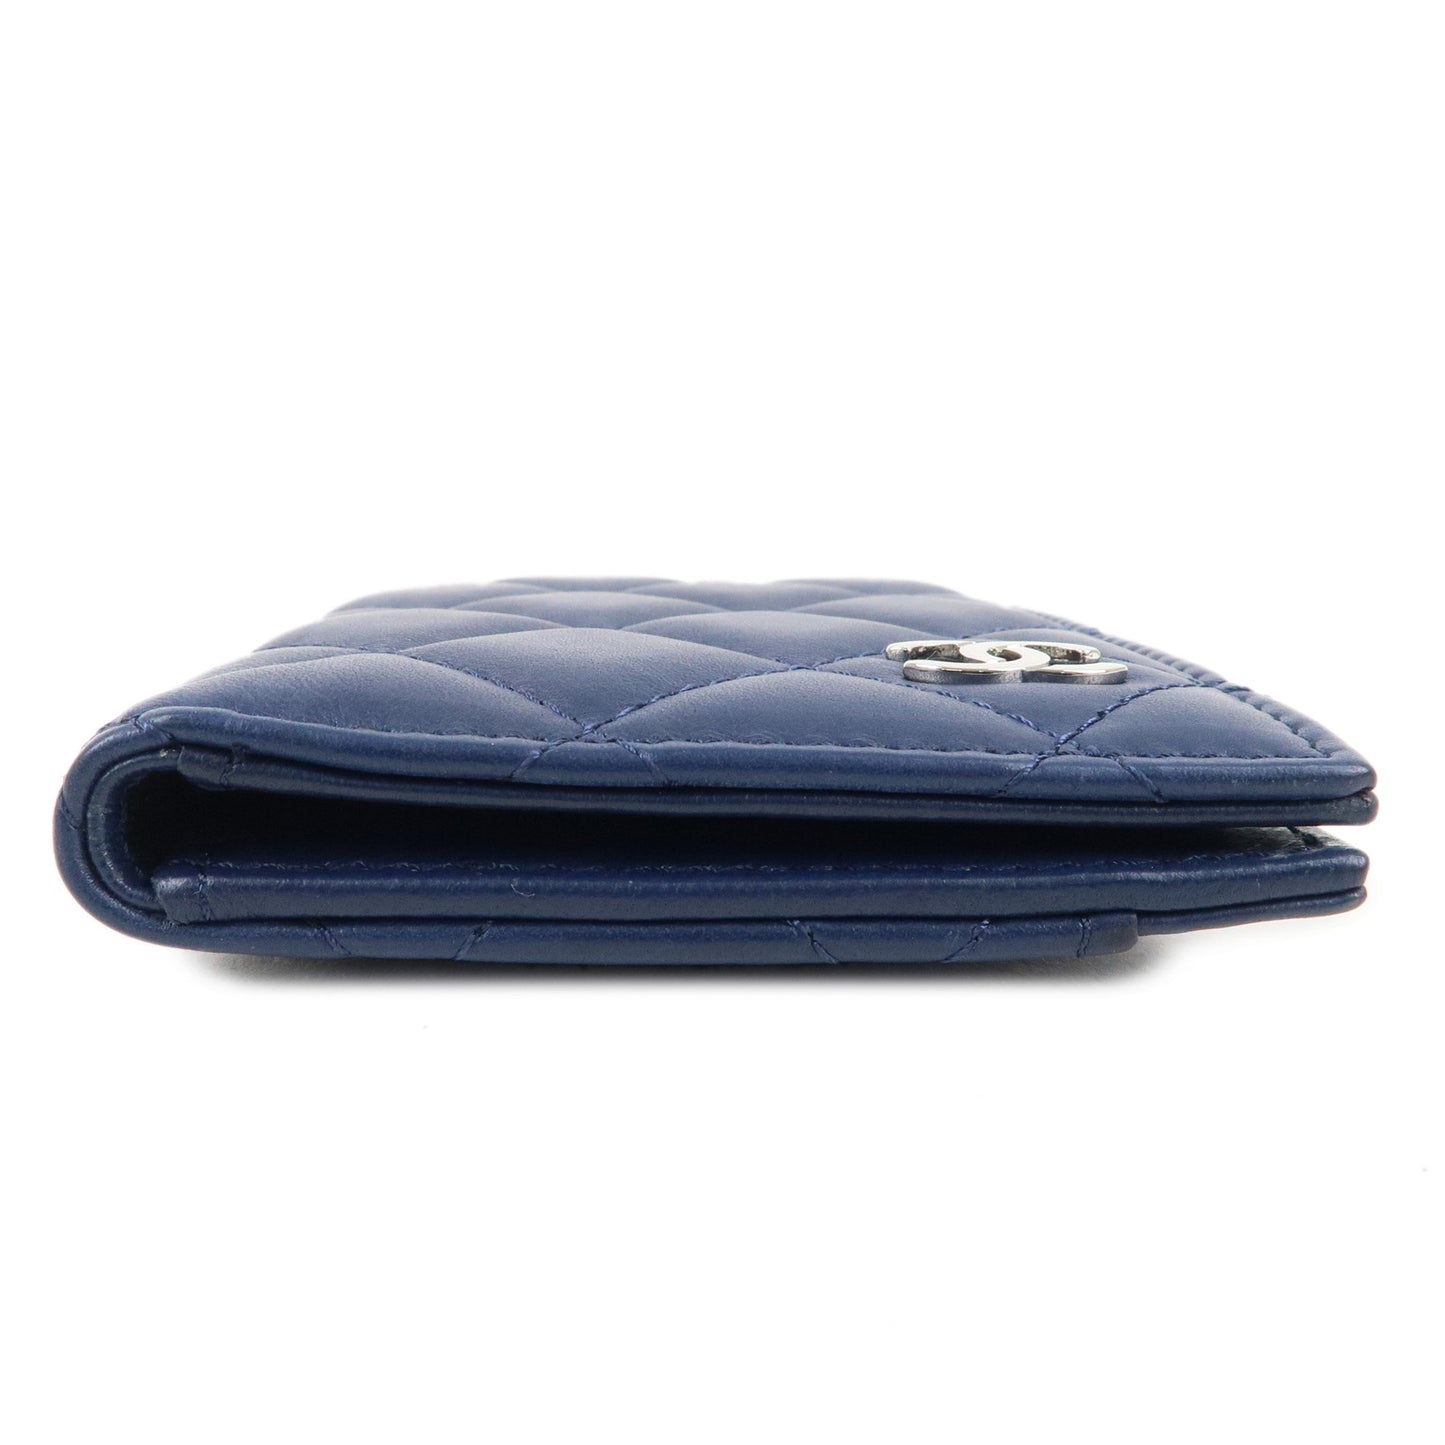 CHANEL Timeless Classic Lamb Skin Pass Case Card Case Navy A82369